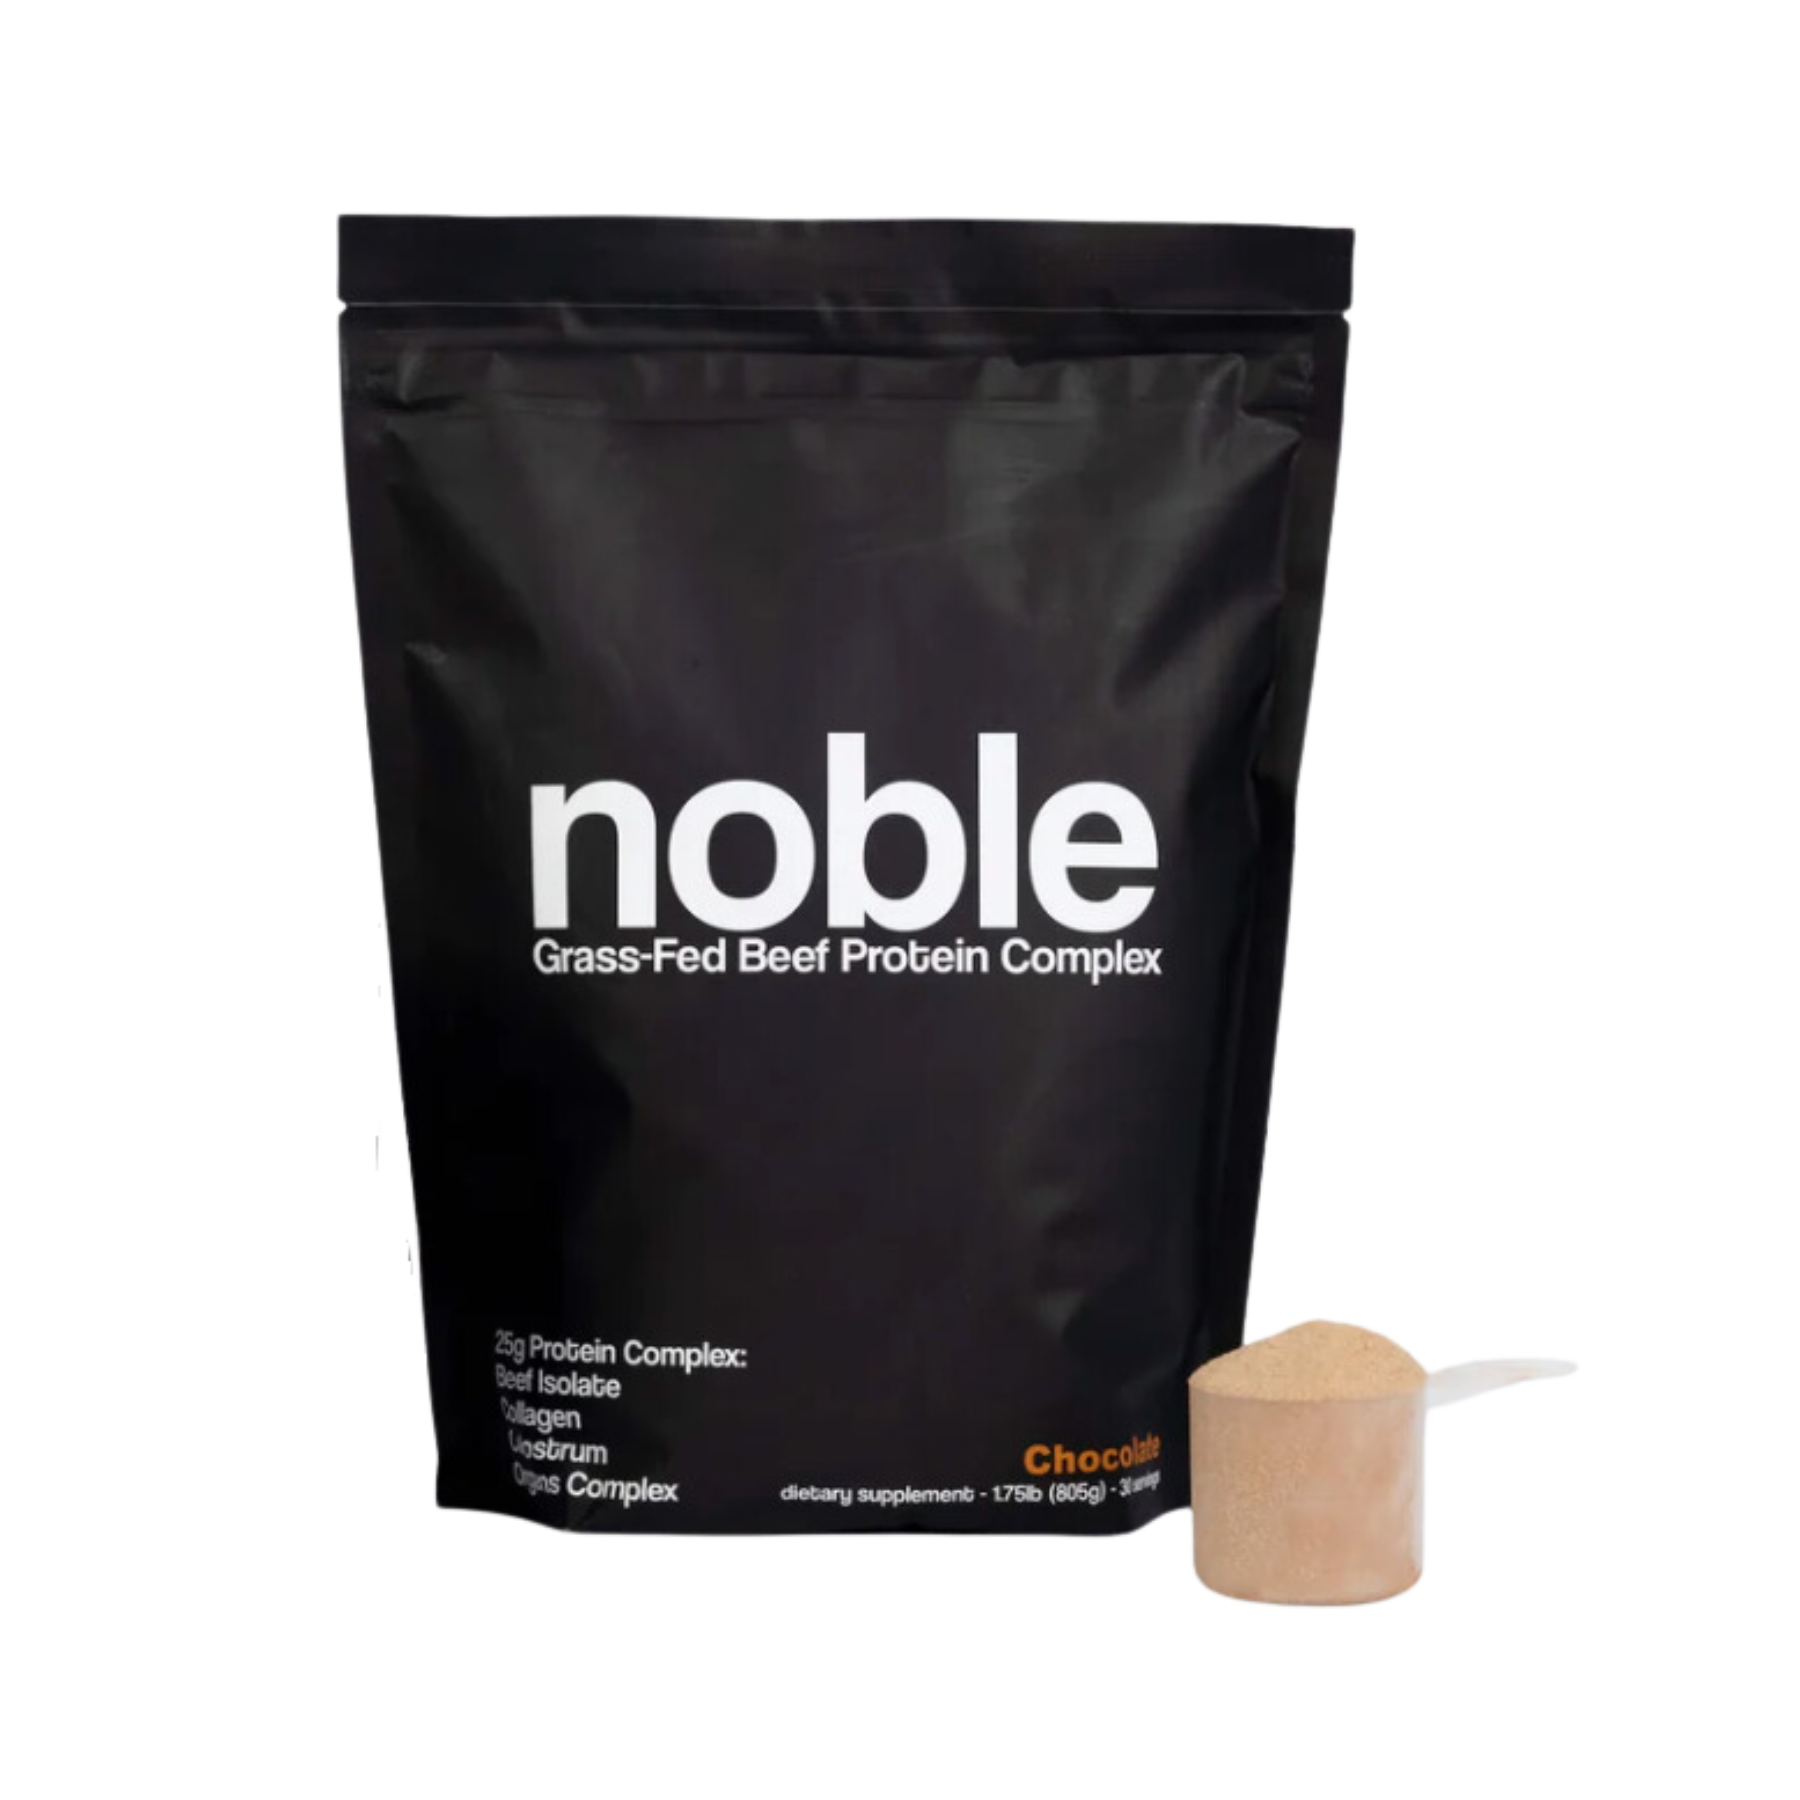 Noble Animal-Based Nutrition Protein Powder